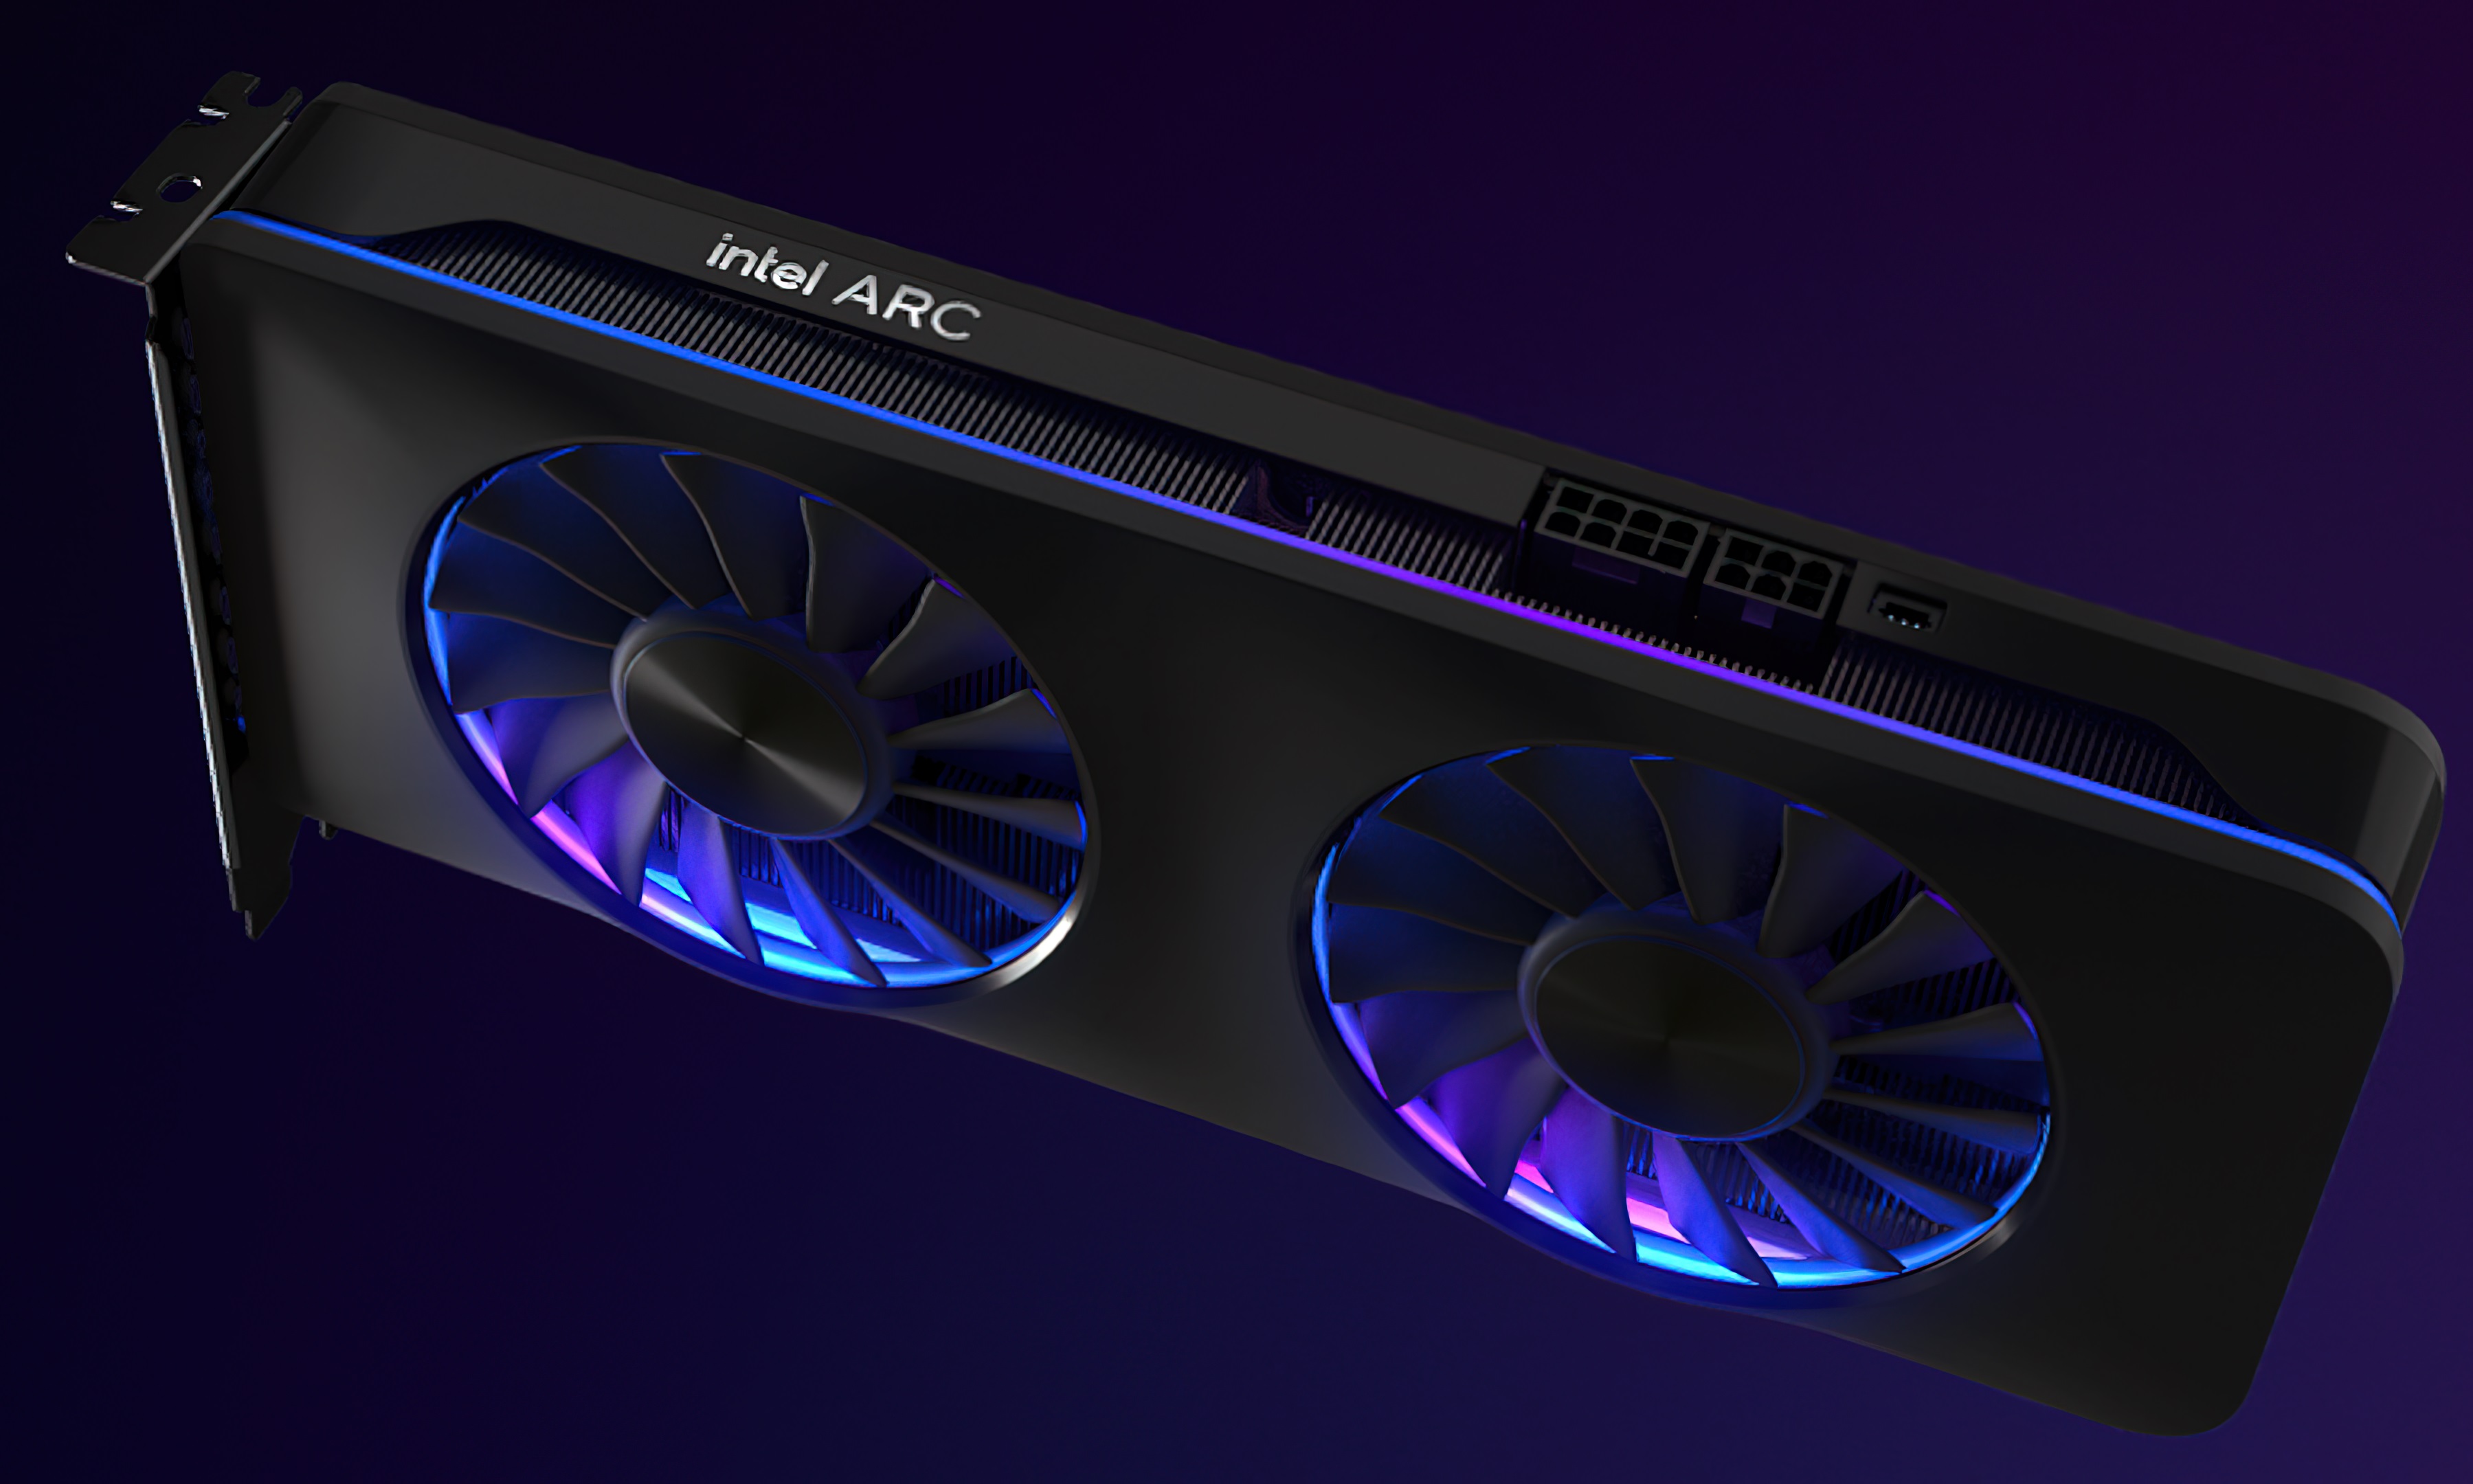 Intel Arc A770 Limited Edition Graphics Card Breakdown Reveals